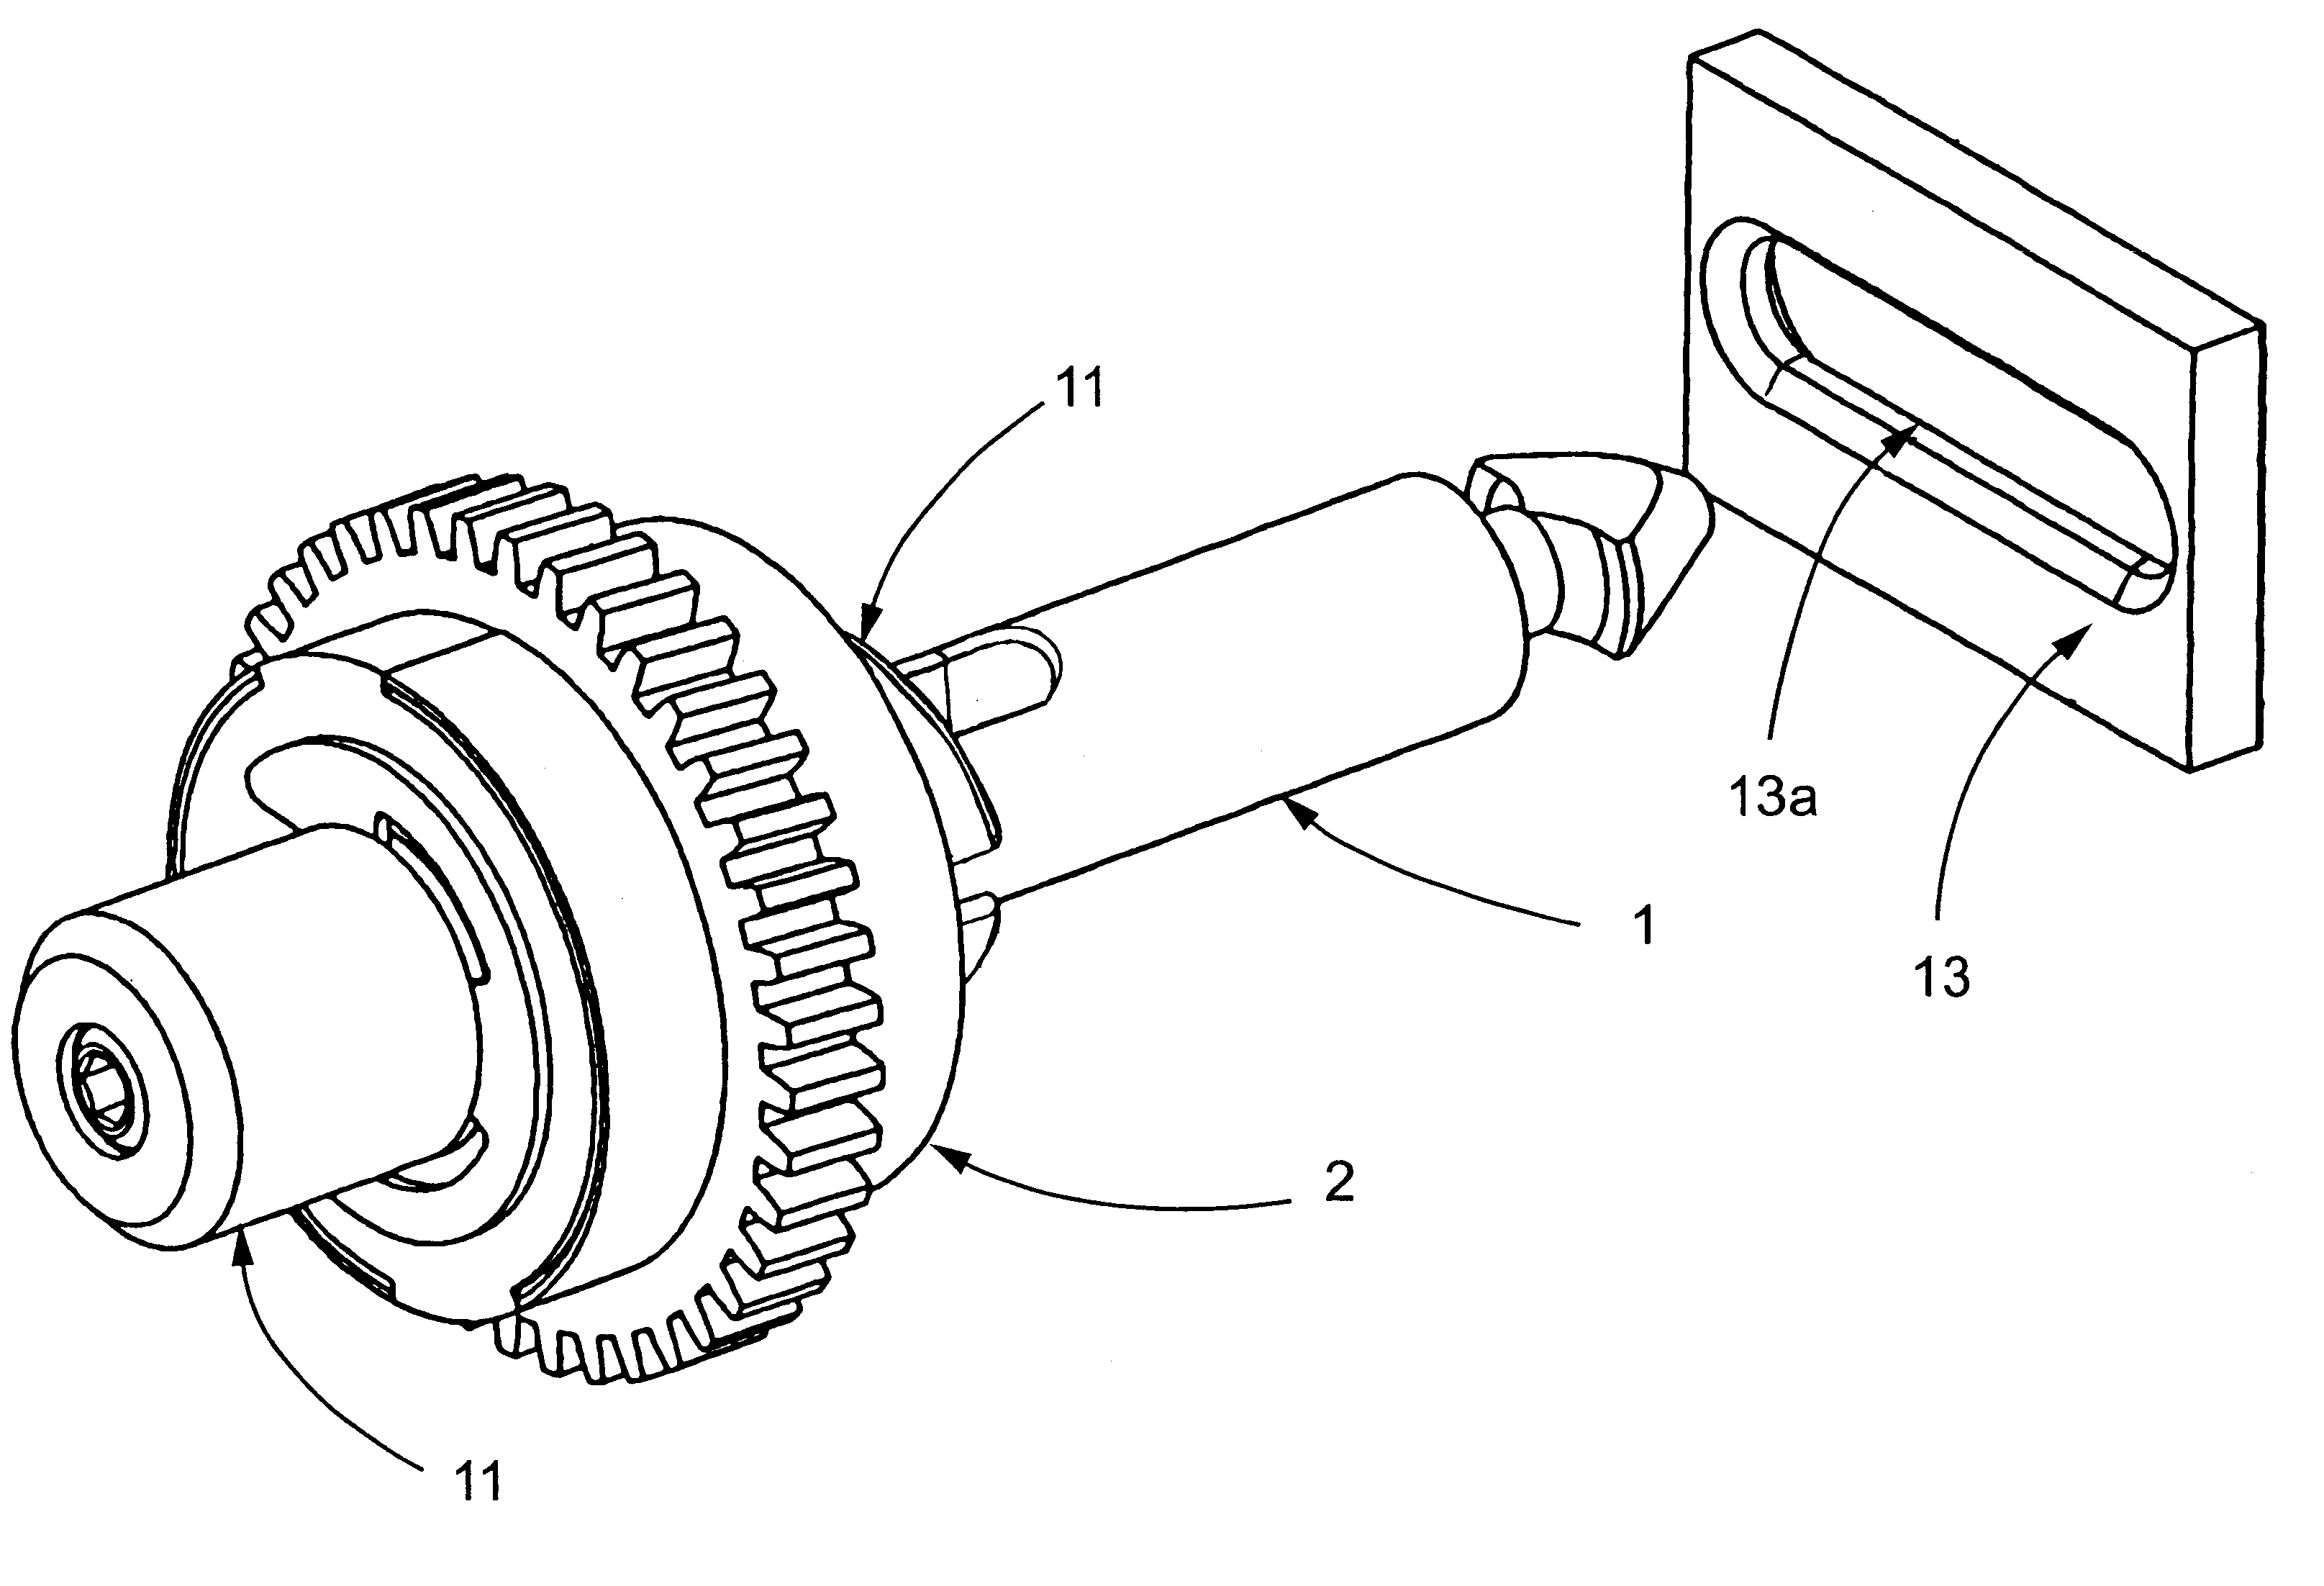 Bayonet locking system and method for vending machines and the like